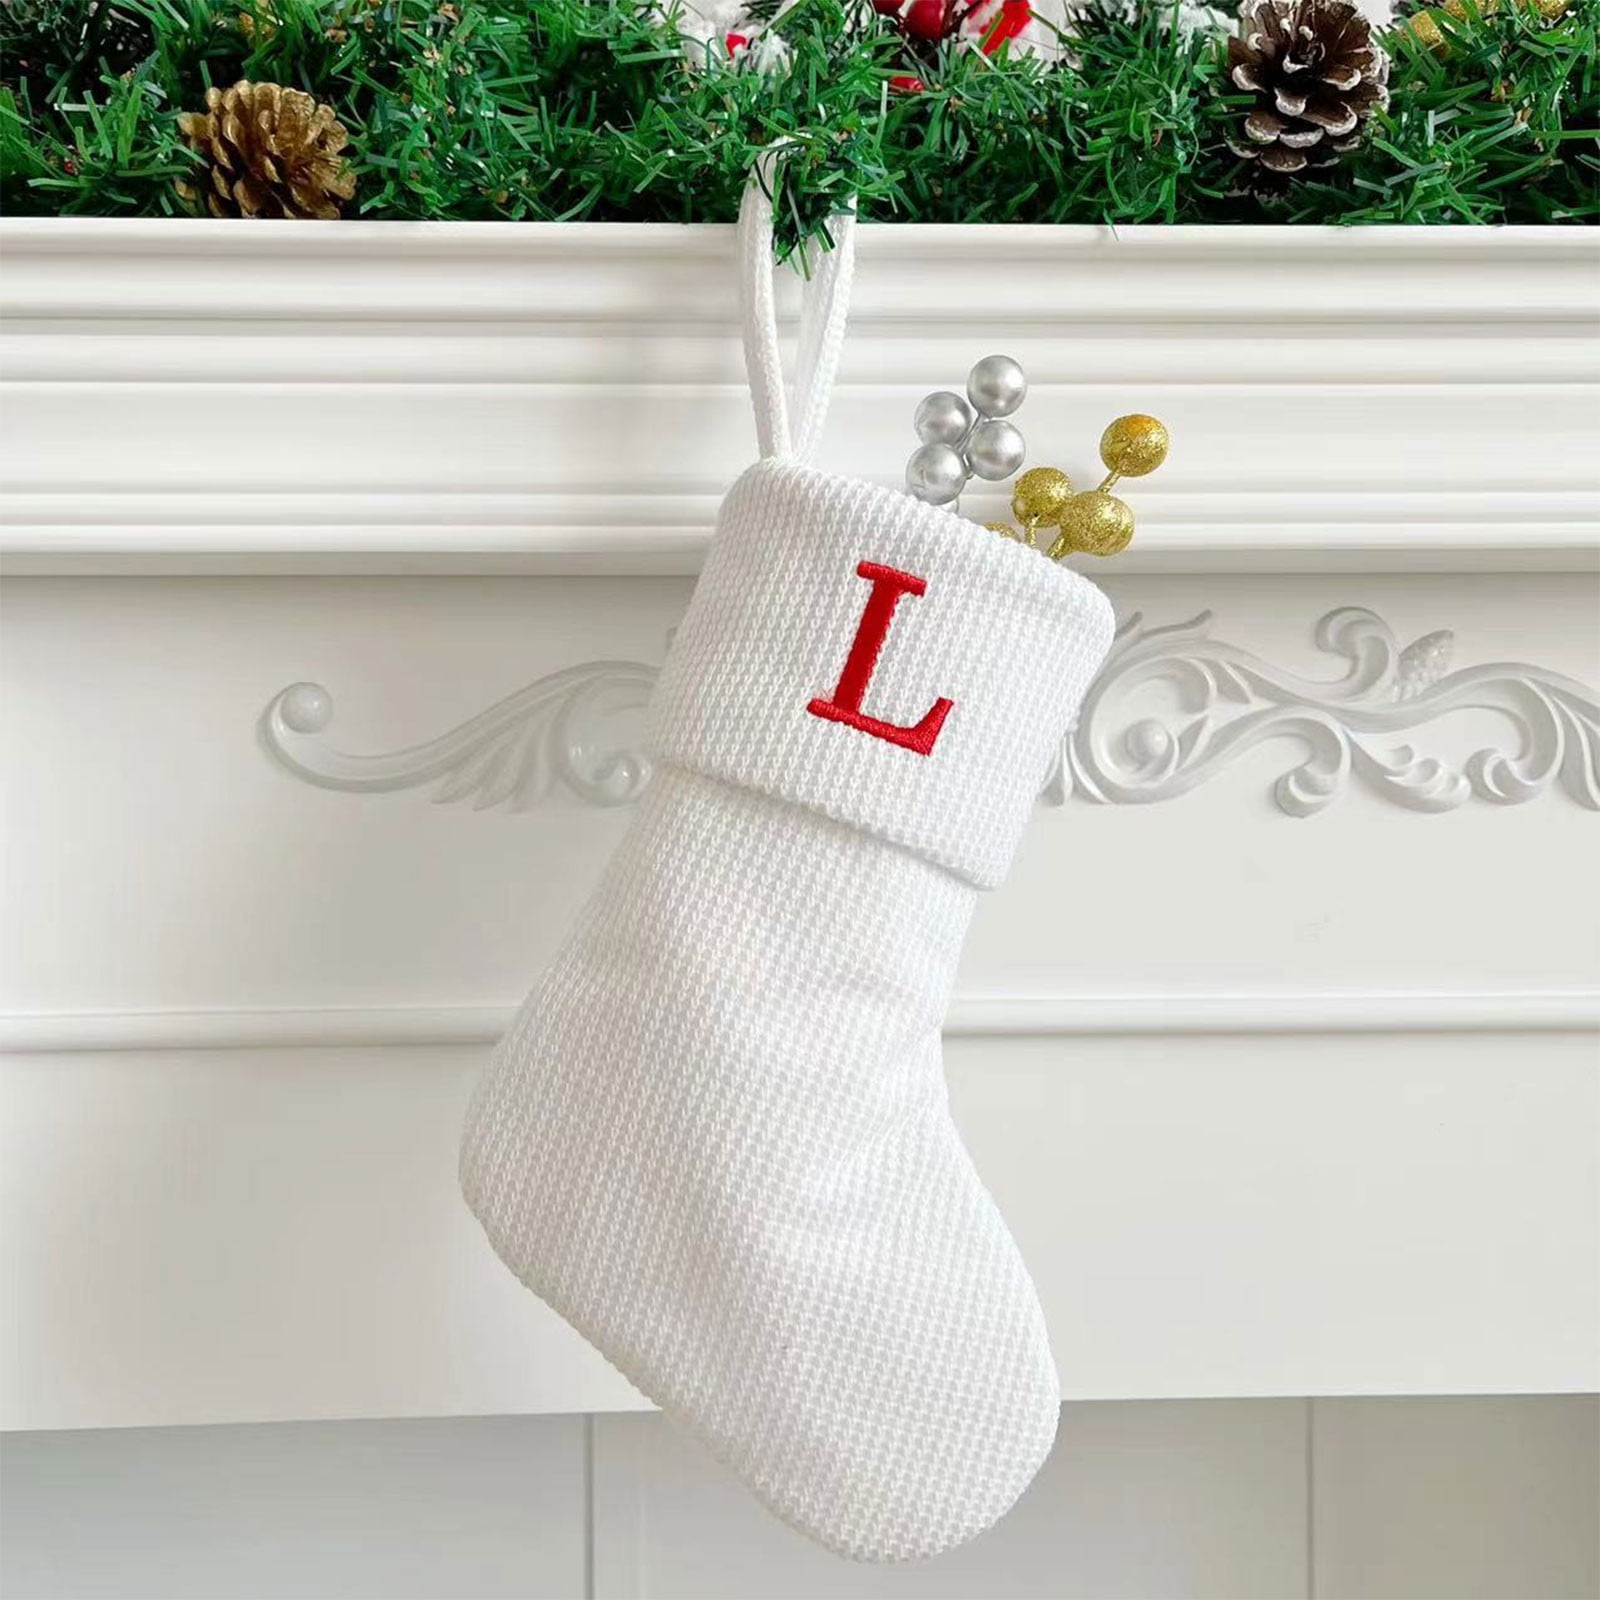 Christmas Special! HIMIWAY Christmas Stockings Small Embroidered Letter ...